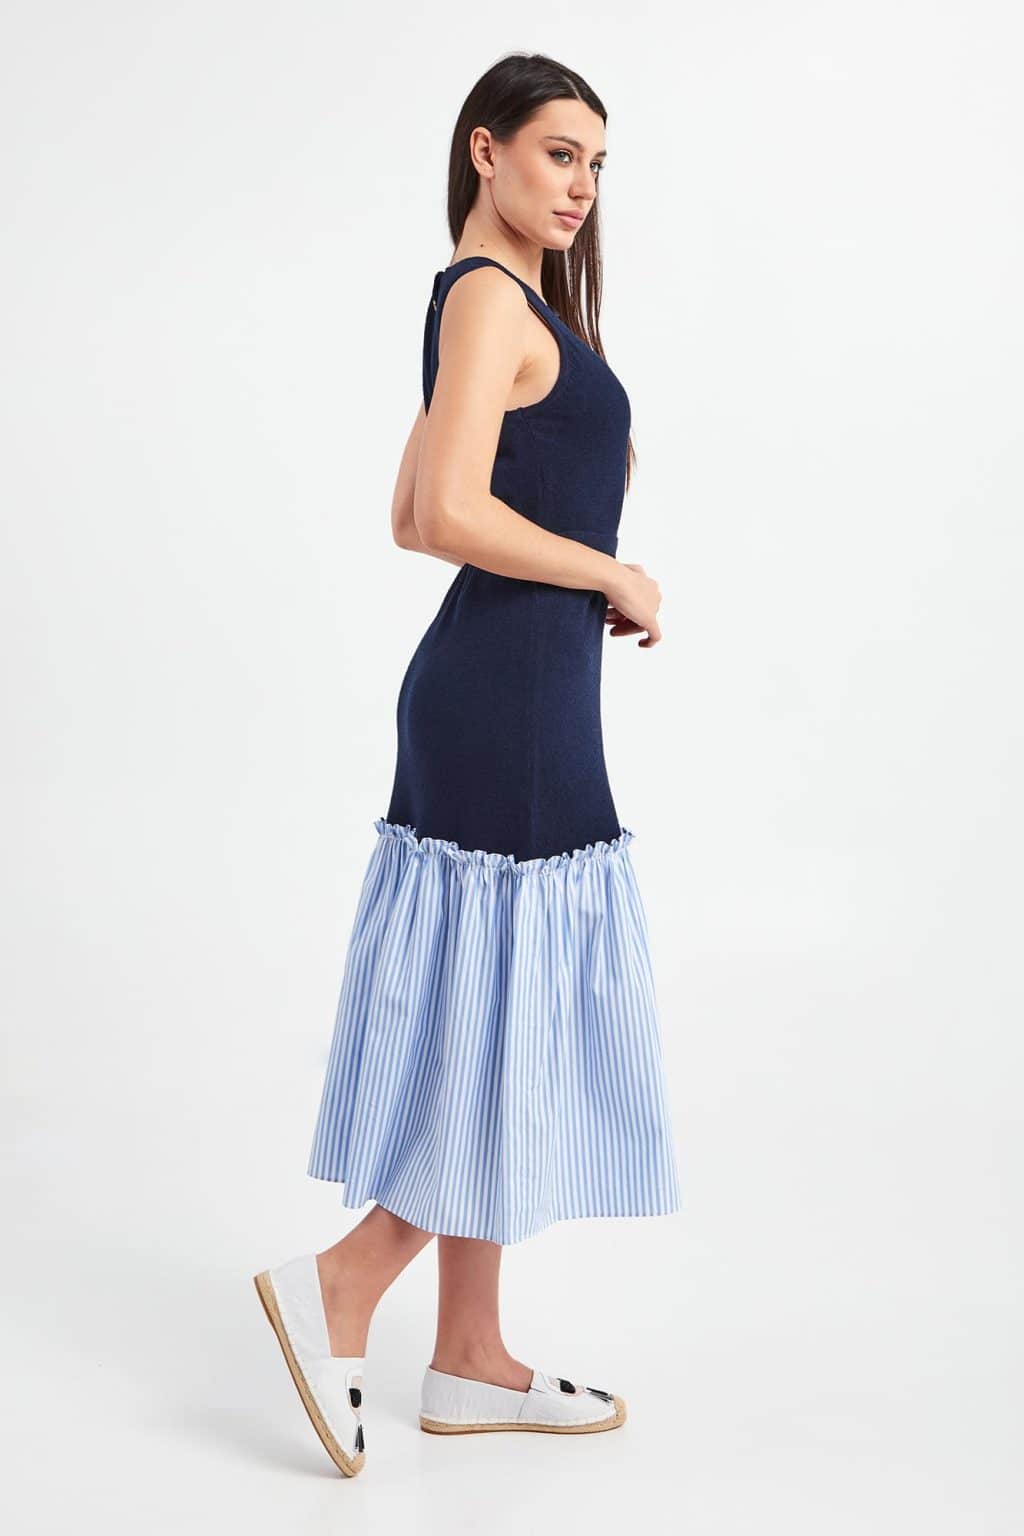 Twinset Knitted Dress With Poplin Striped Finish